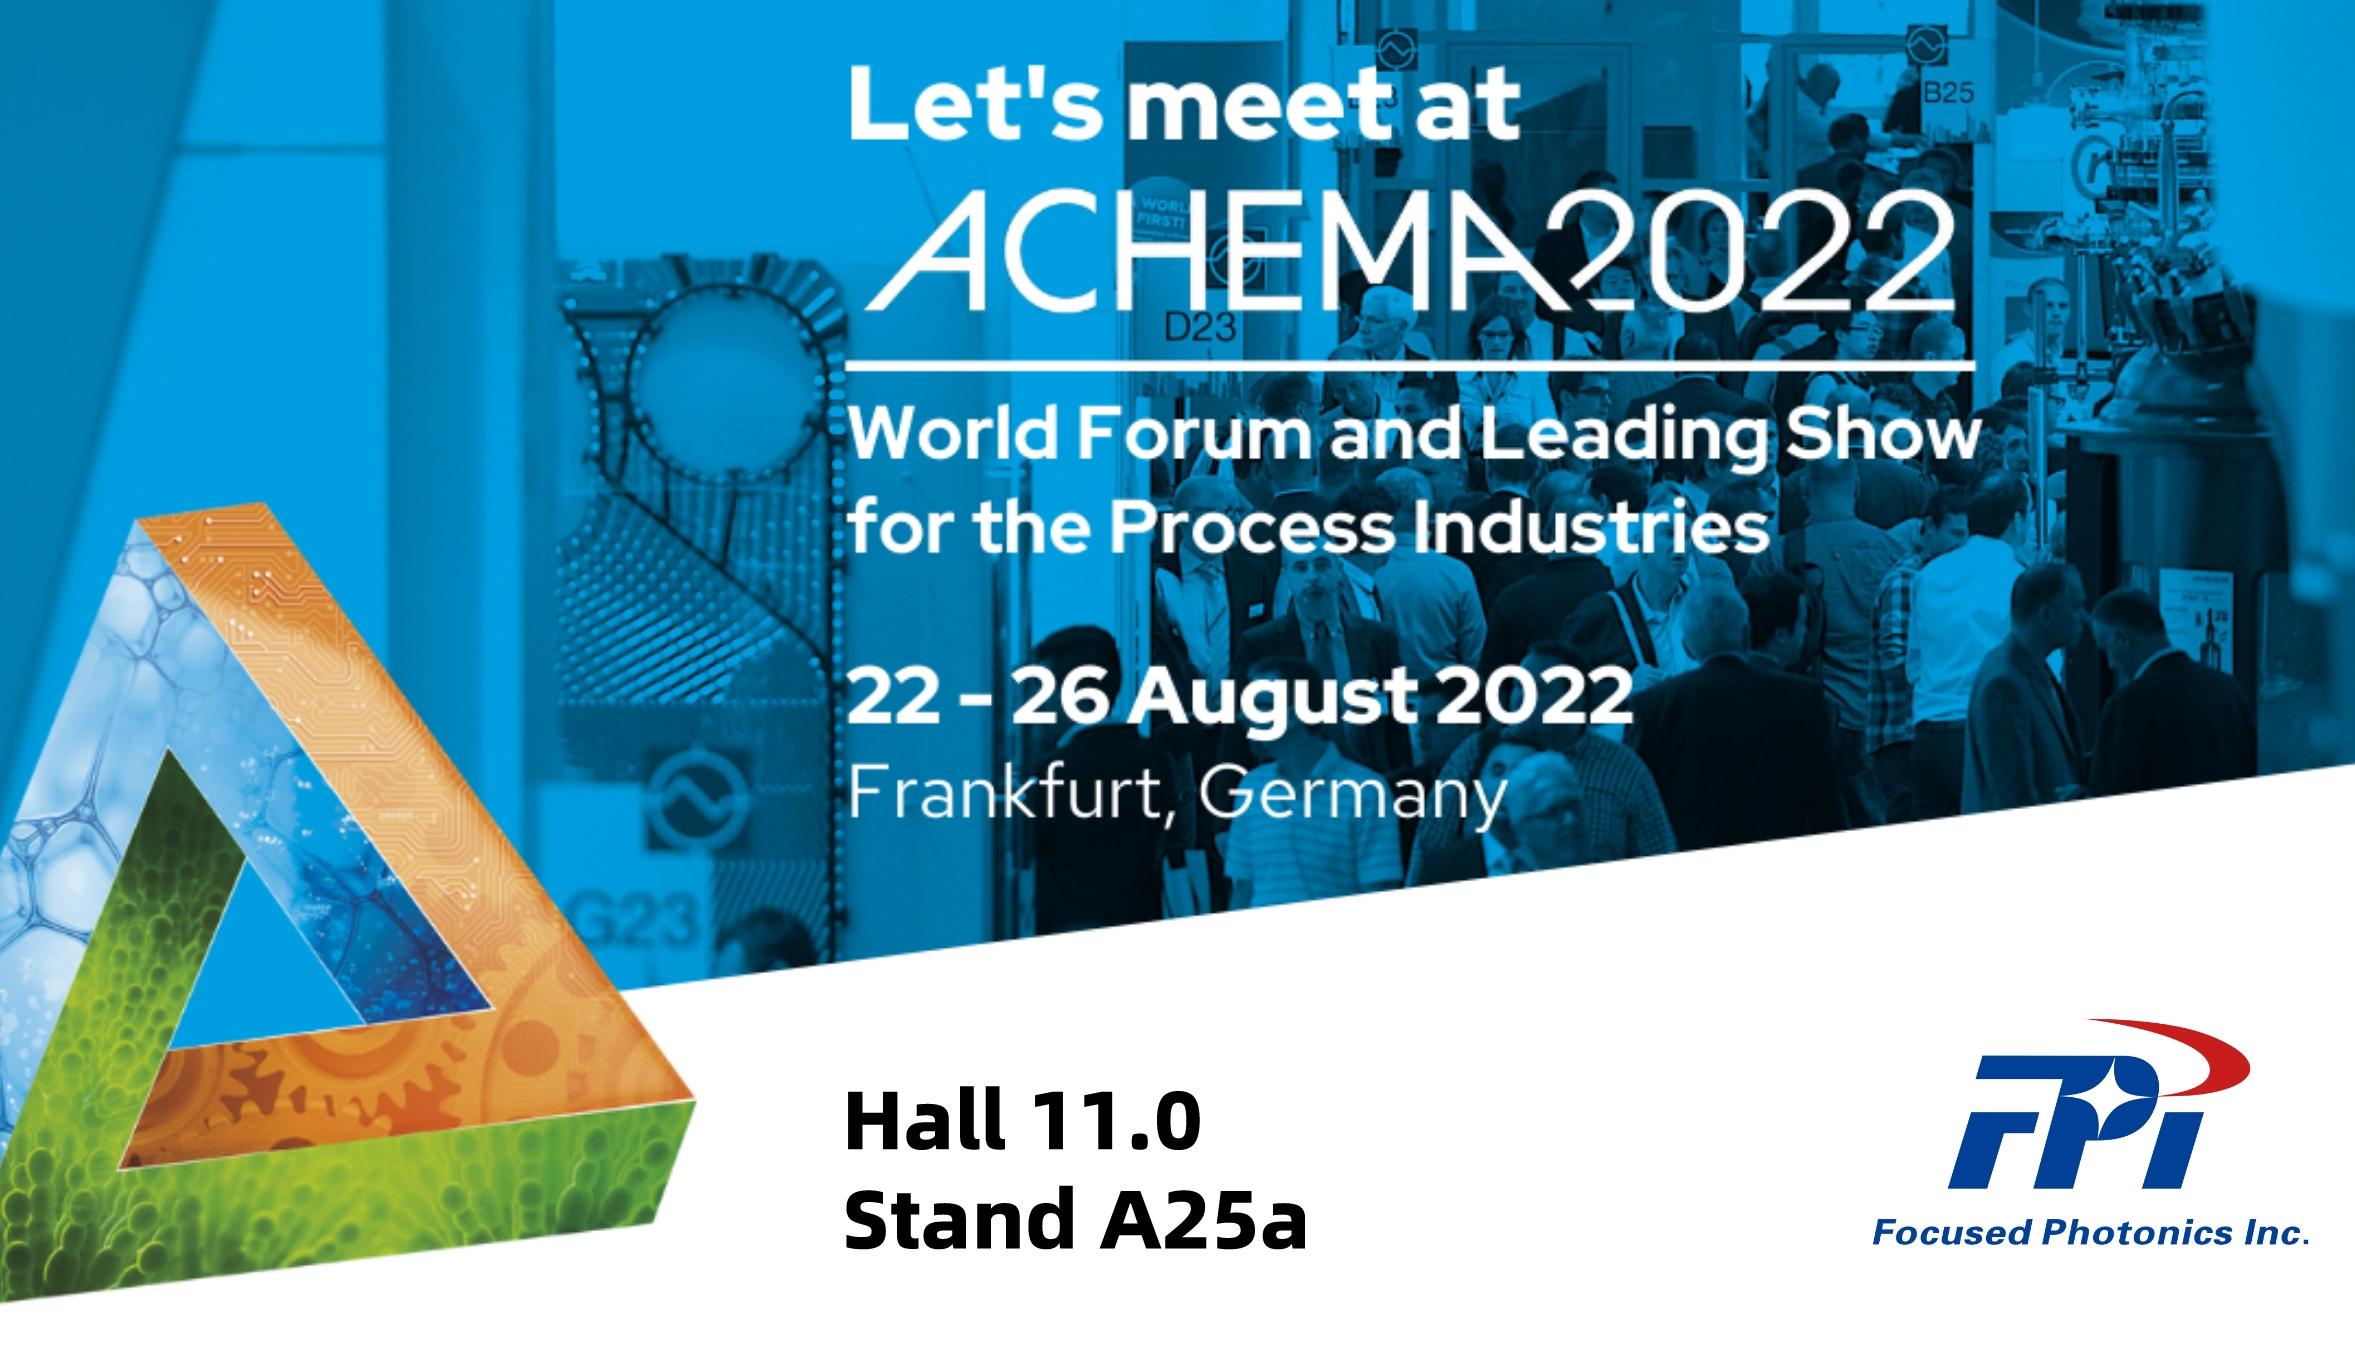 ACHEMA 2022 Grand Opening From Today